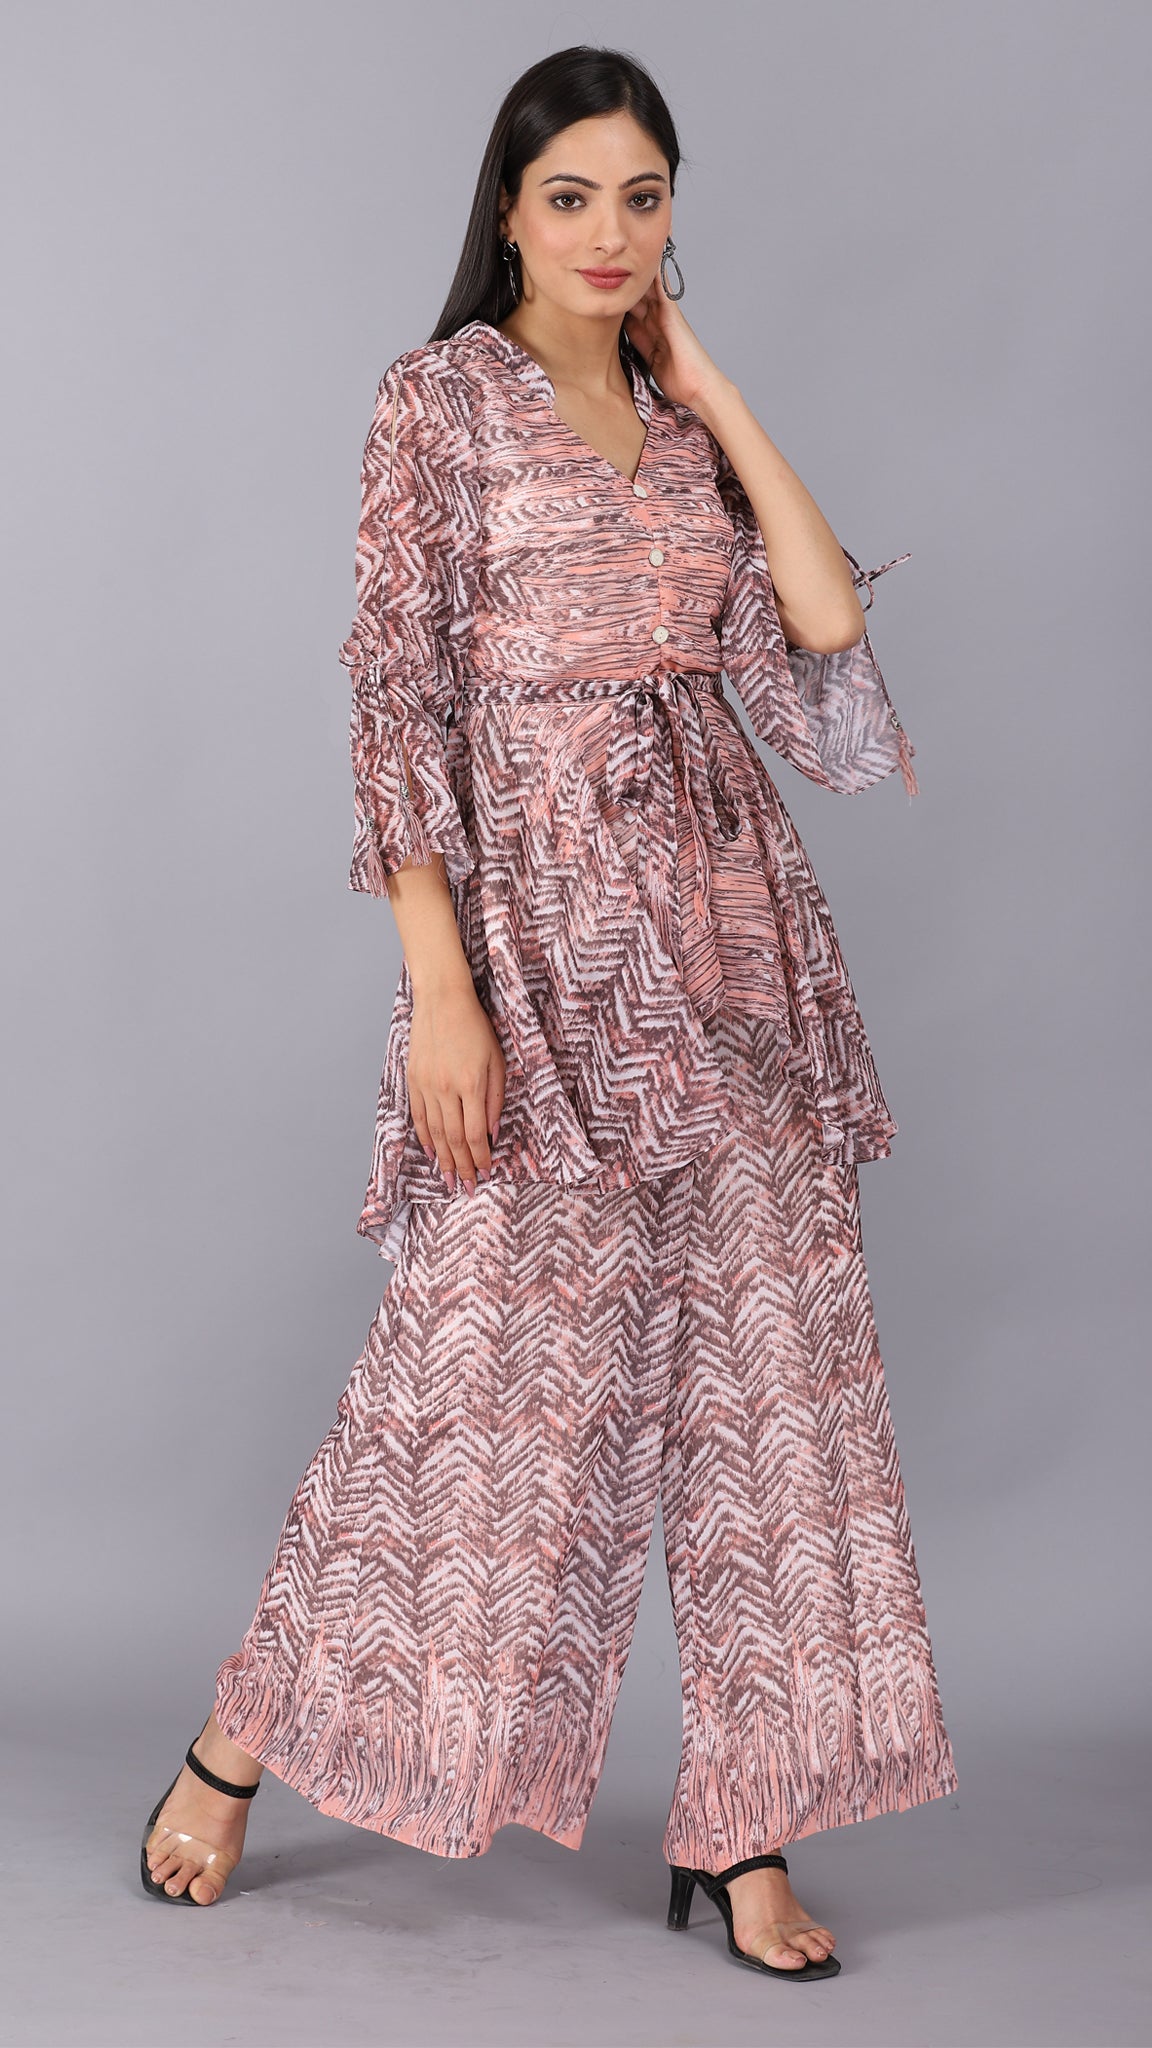 Printed peach co-ord set with belt